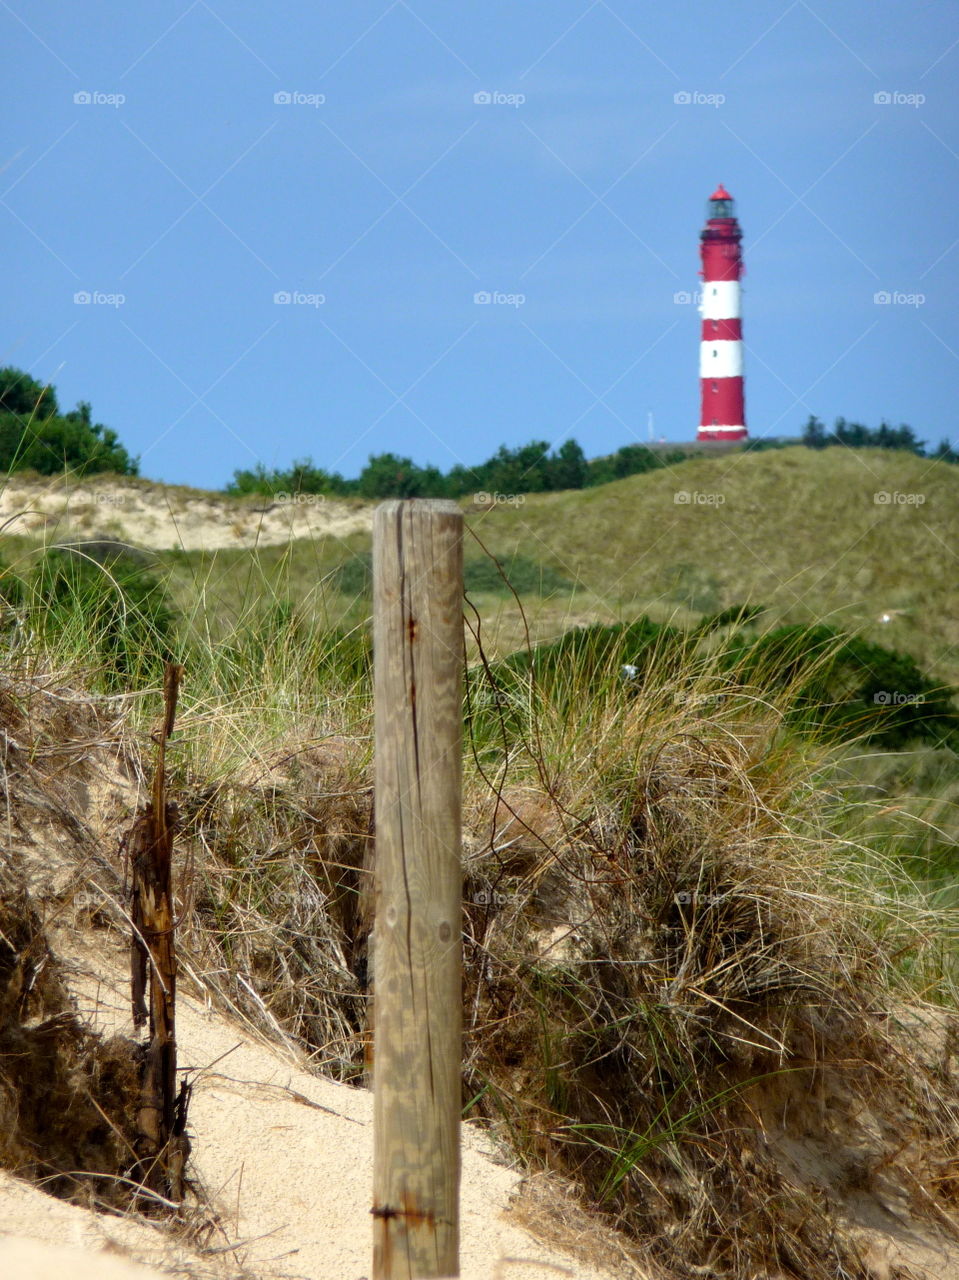 White and red striped Lighthouse at North Sea Island Amrum in Germany